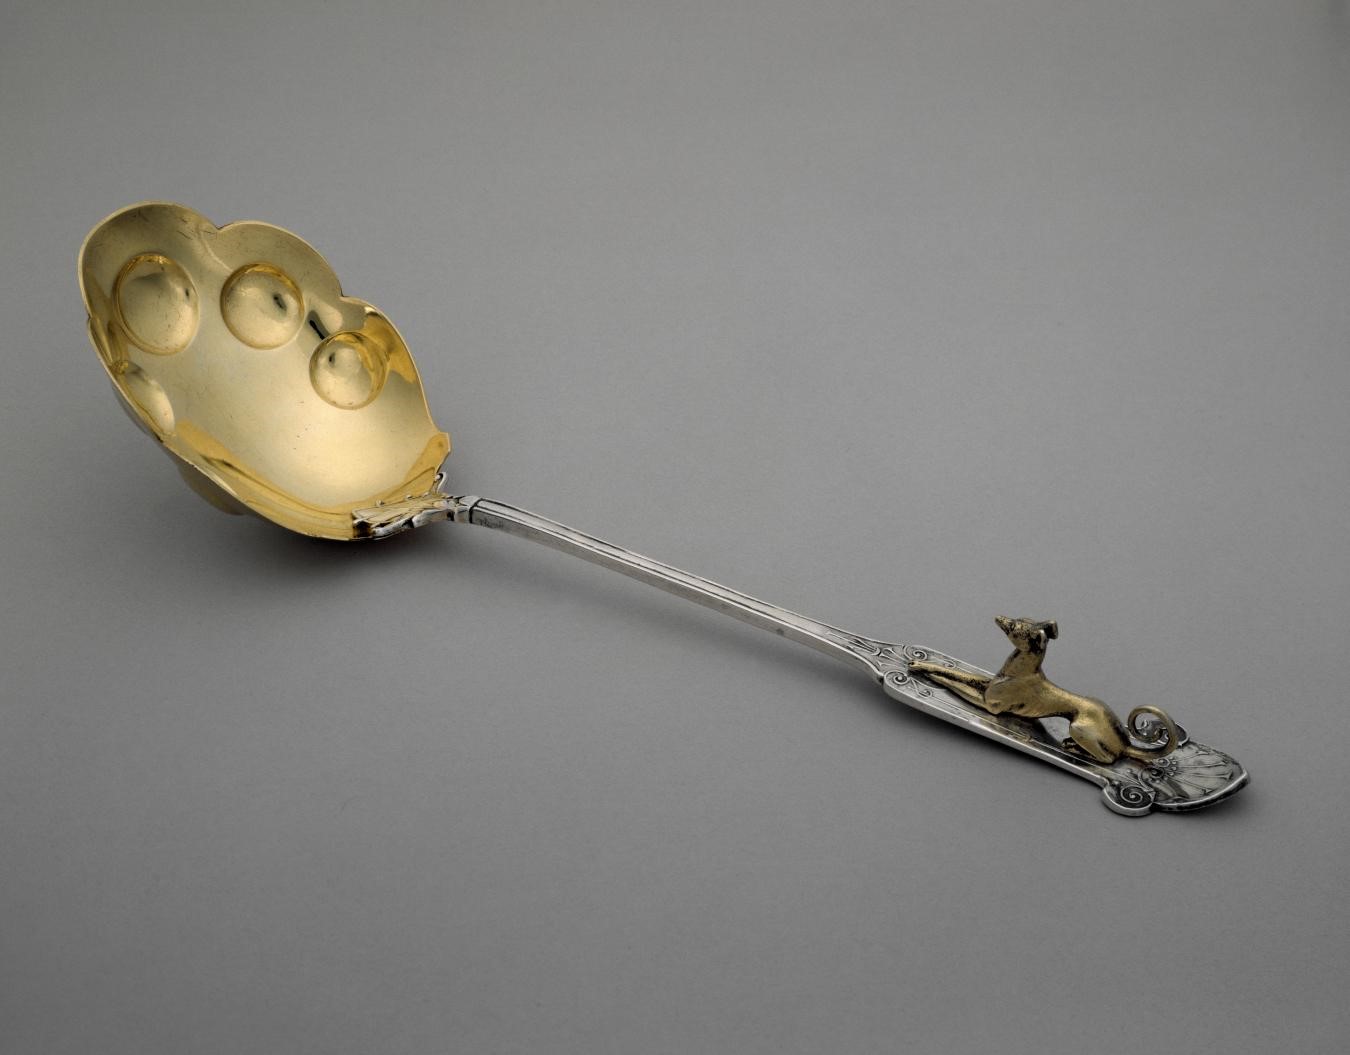 Gorham Manufacturing Company, Berry Spoon, c. 1868–75, silver and silver gilding, the Bayou Bend Collection